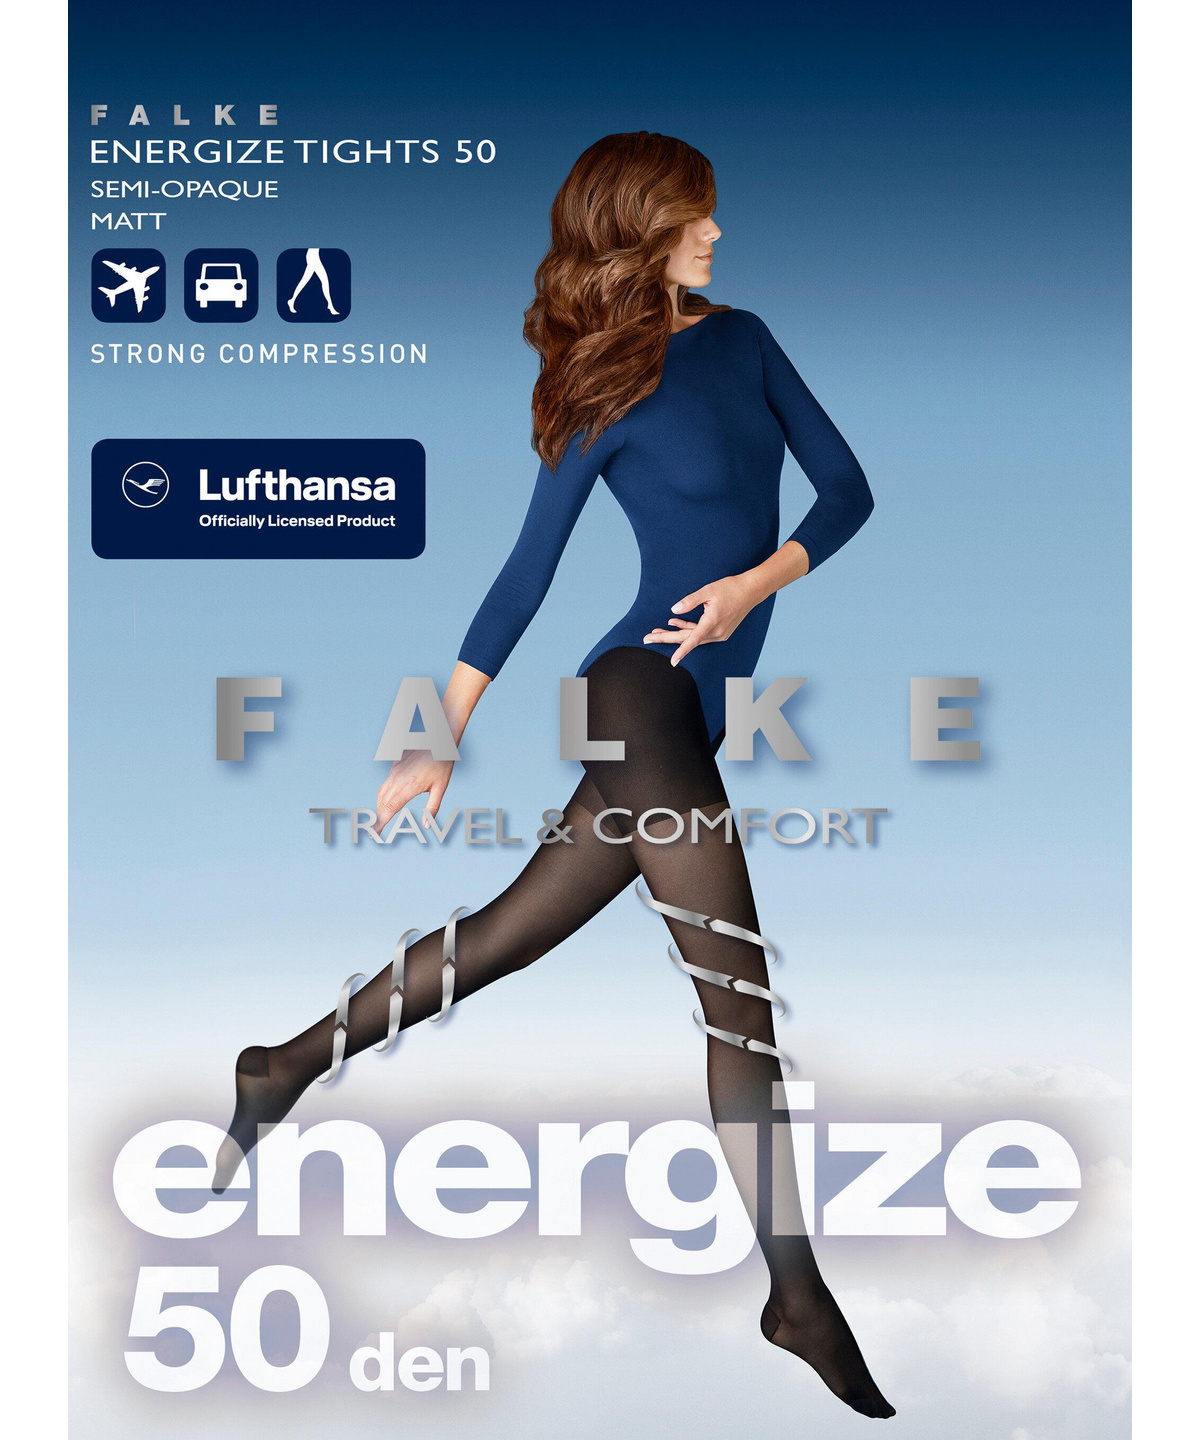 FALKE Synthetic Lufthansa Travel & Comfort Energize Tights 15 Den Ultra-sheer Black Tan More Colours Transparent With Strong Compression Effect in Natural Womens Clothing Hosiery Tights and pantyhose Save 2% 